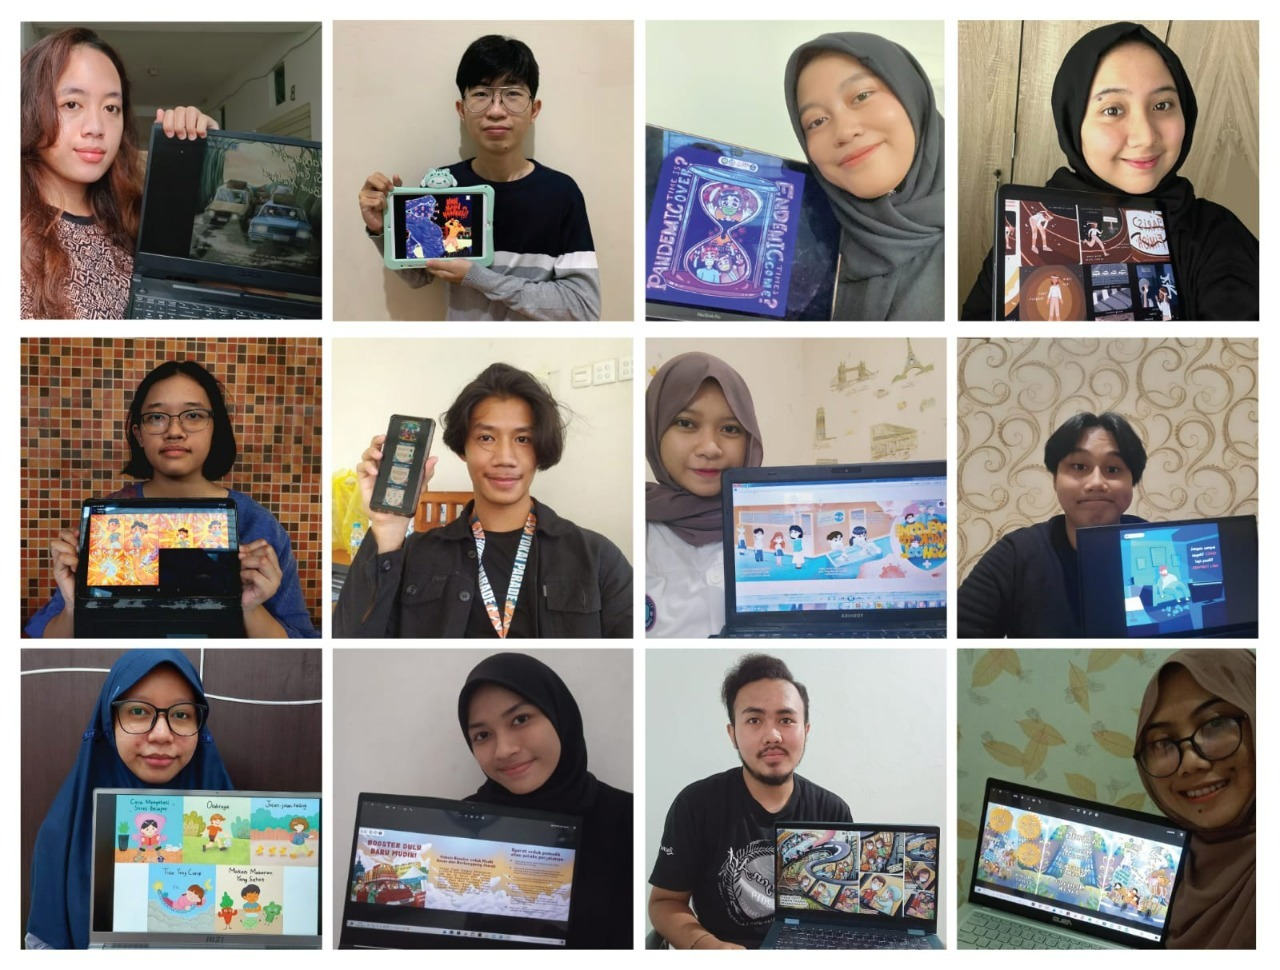 ITS DKV Department students with their respective works in the form of Illustration Posters and Digital Comics